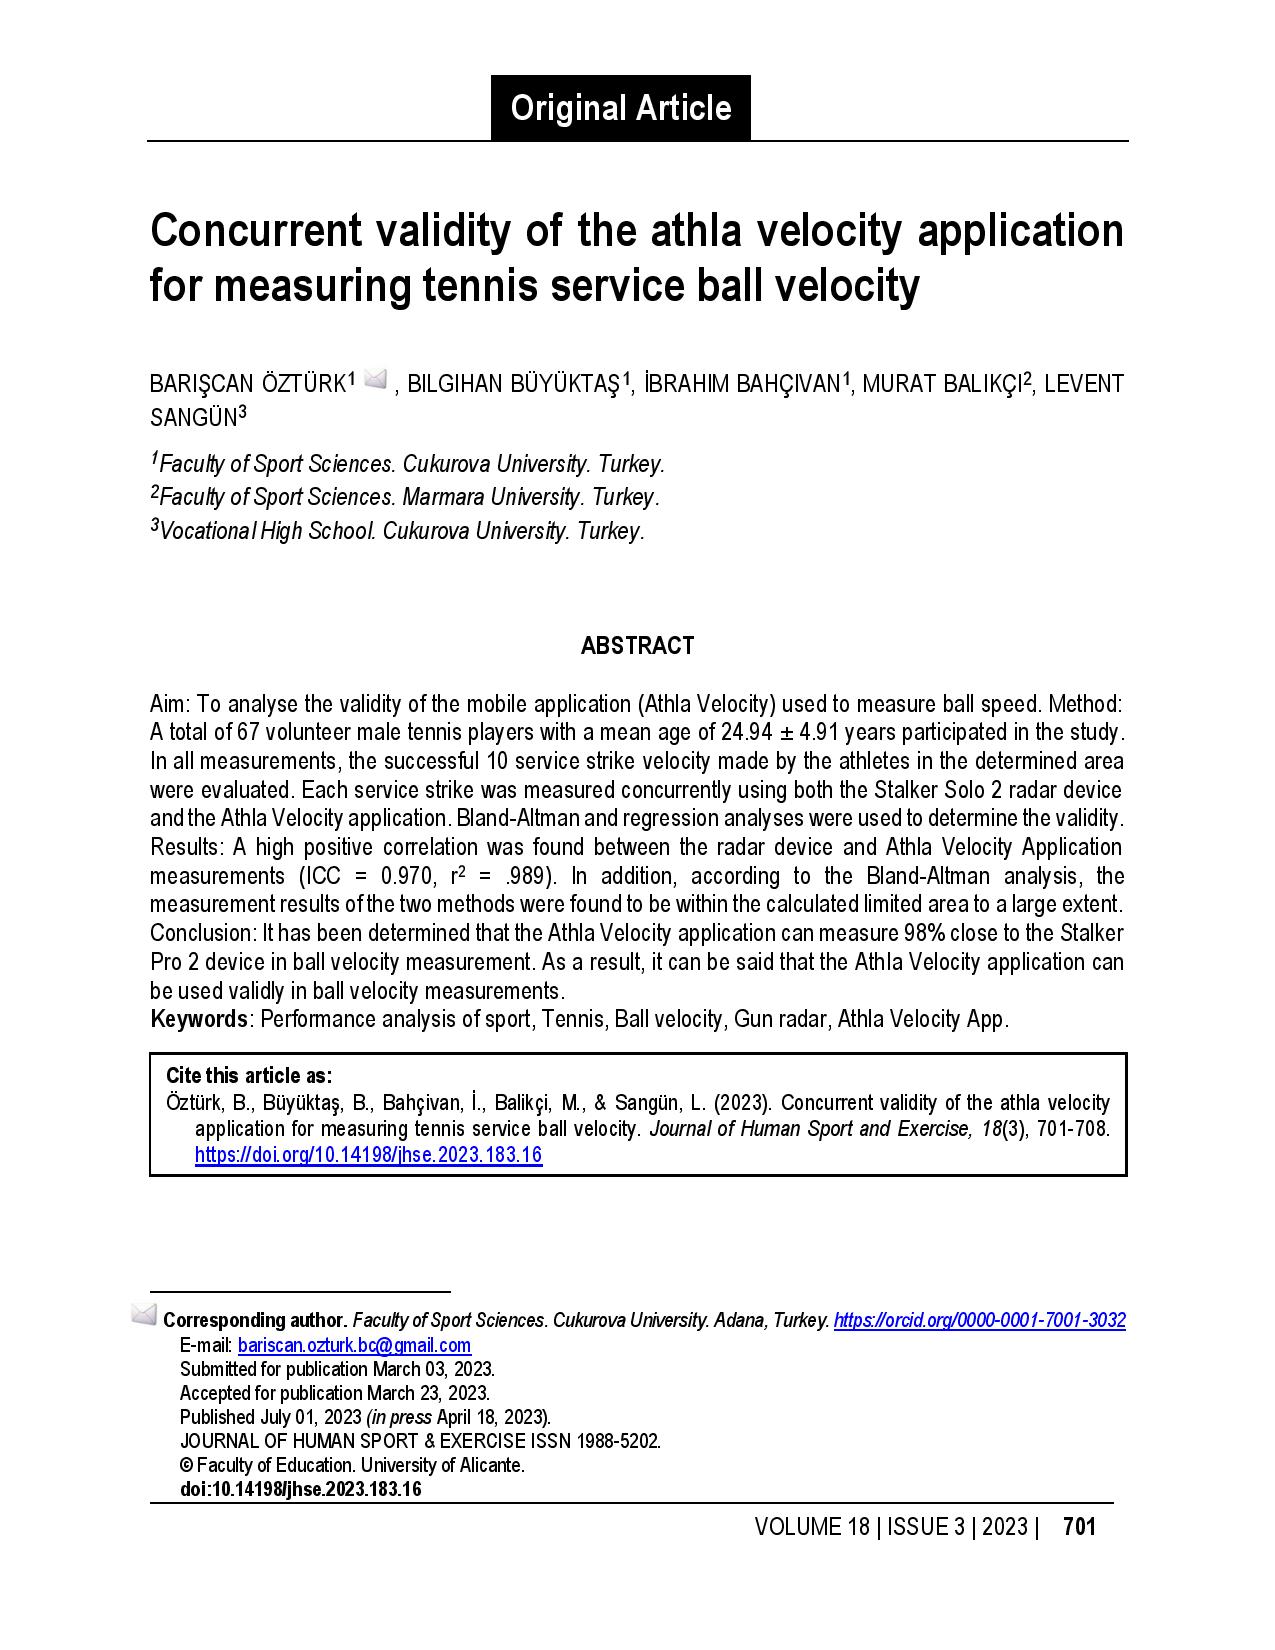 Concurrent validity of the athla velocity application for measuring tennis service ball velocity